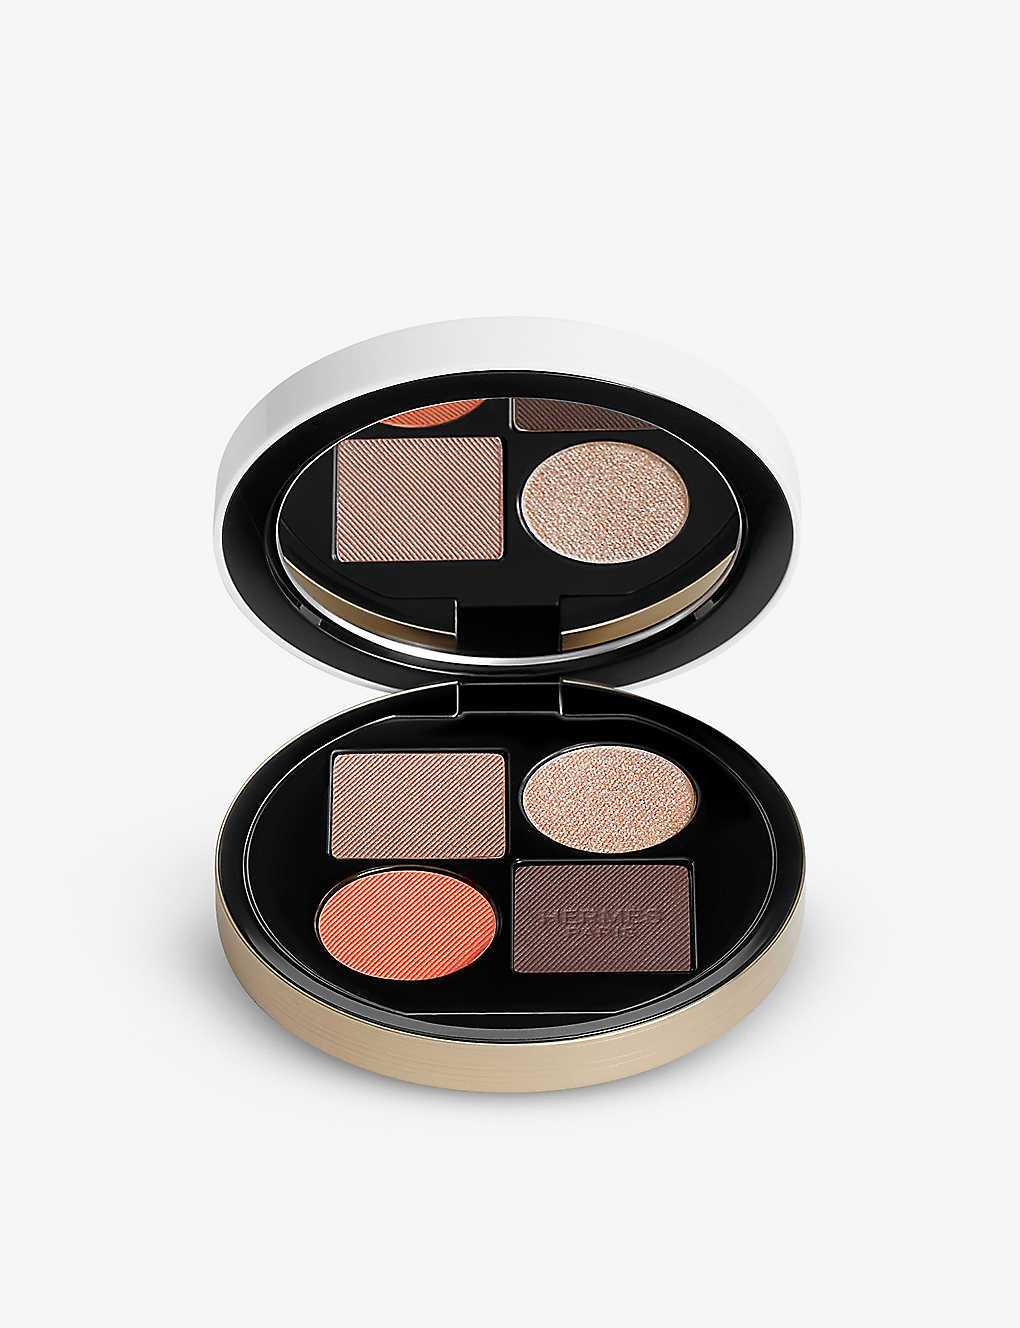 Hermes 03 Ombres Fauves Ombres D'hermès Eyeshadow Palette 3g